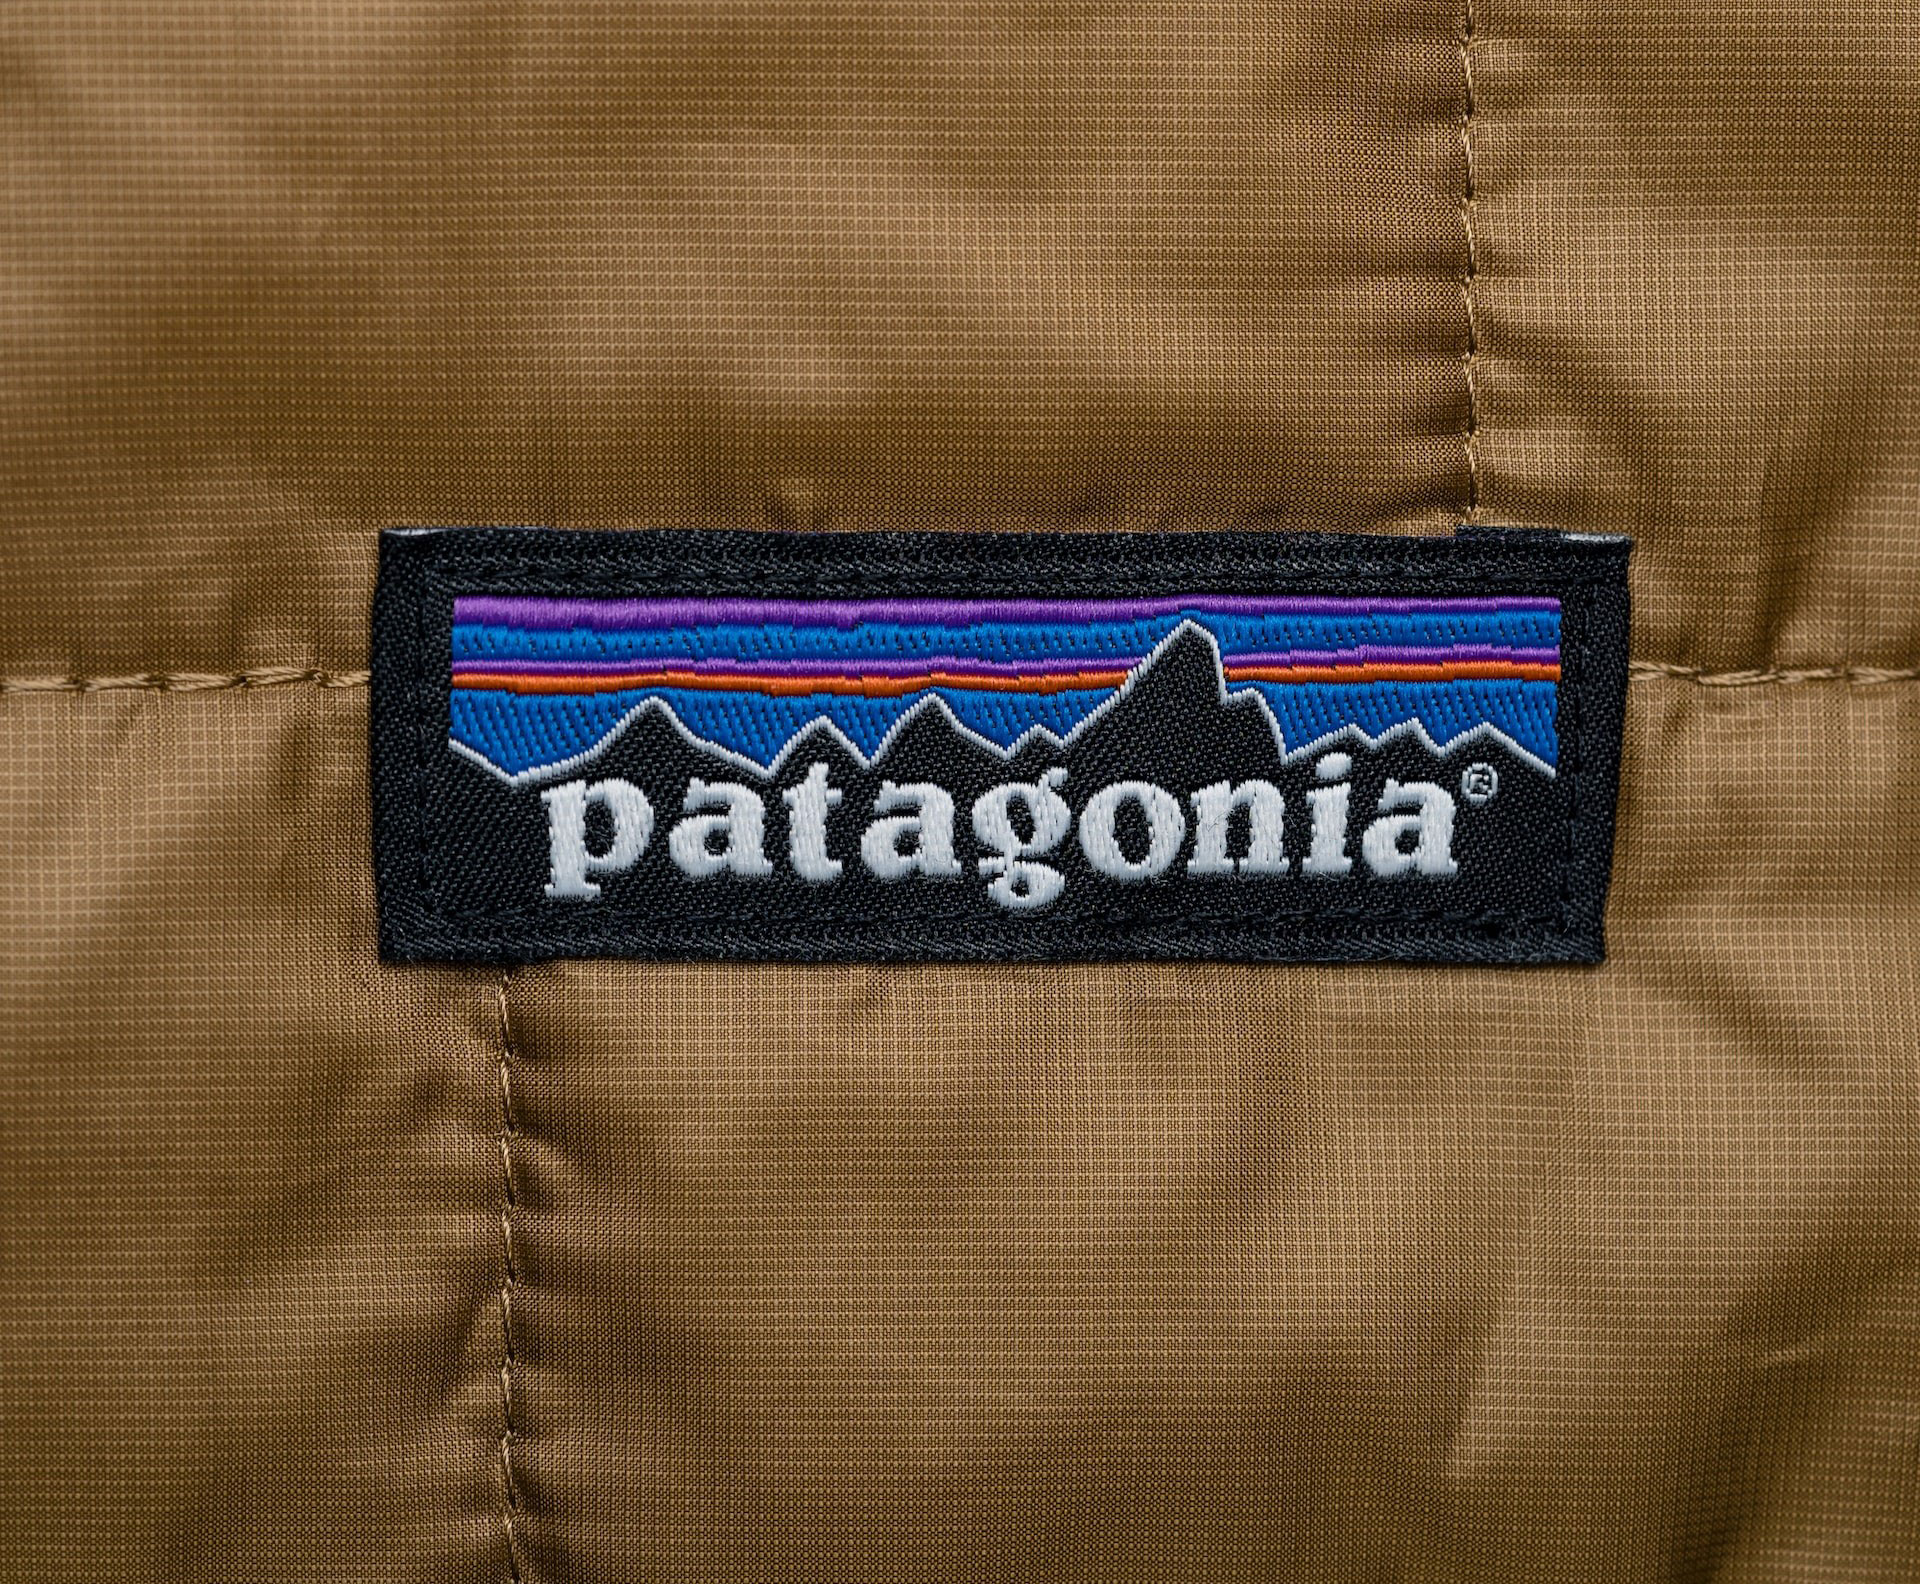 patagonia competitors and alternatives featured image by malik skydsgaard